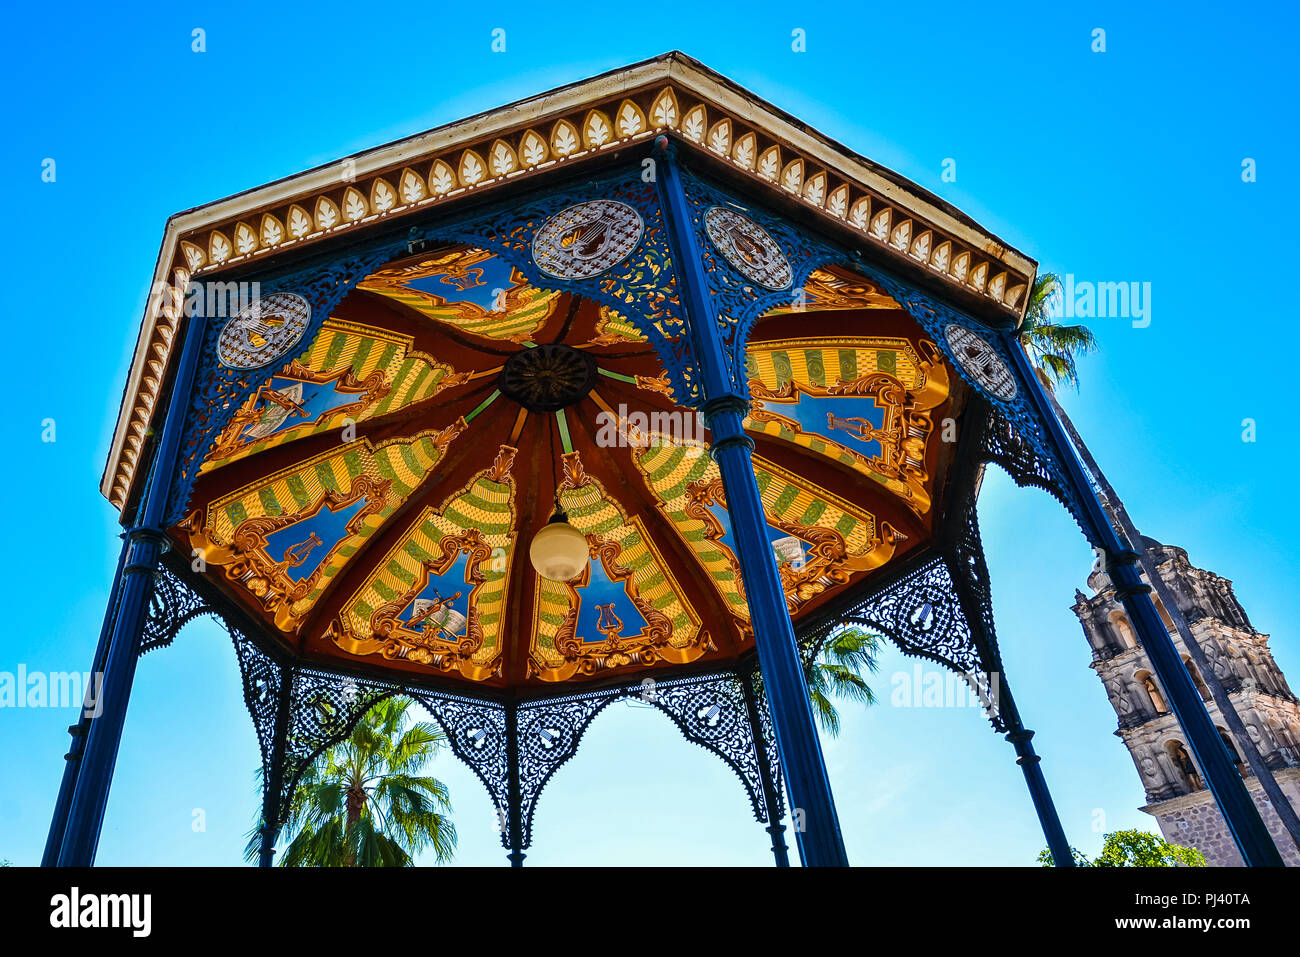 Colorful and Elaborately-Designed Bandstand - Alamos, Sonora, Mexico Stock Photo